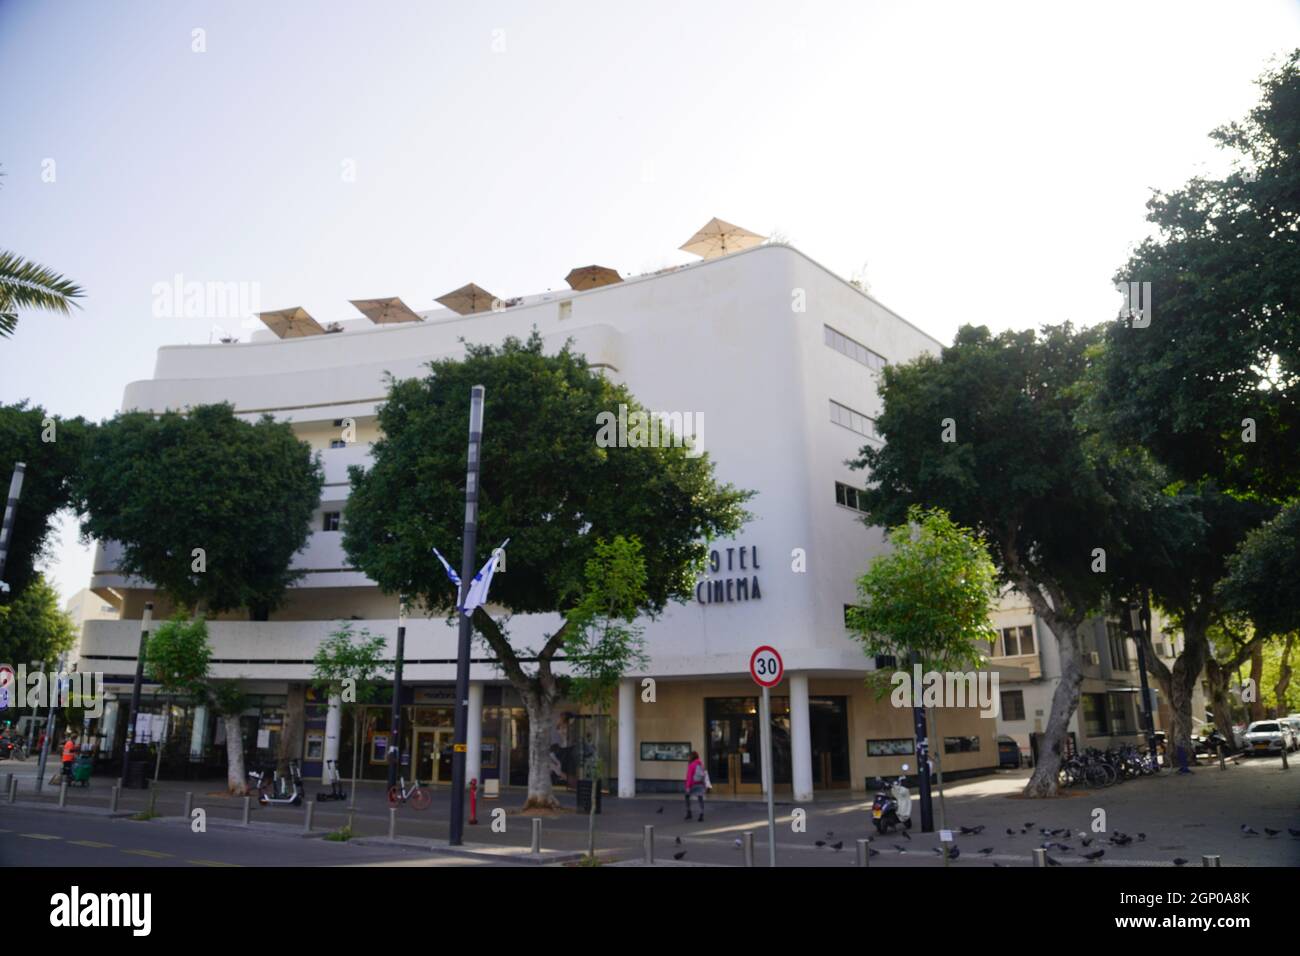 Bauhaus Architecture Hotel Cinema at Zina Dizengoff Square, in Tel Aviv White City. The White City refers to a collection of over 4,000 buildings buil Stock Photo